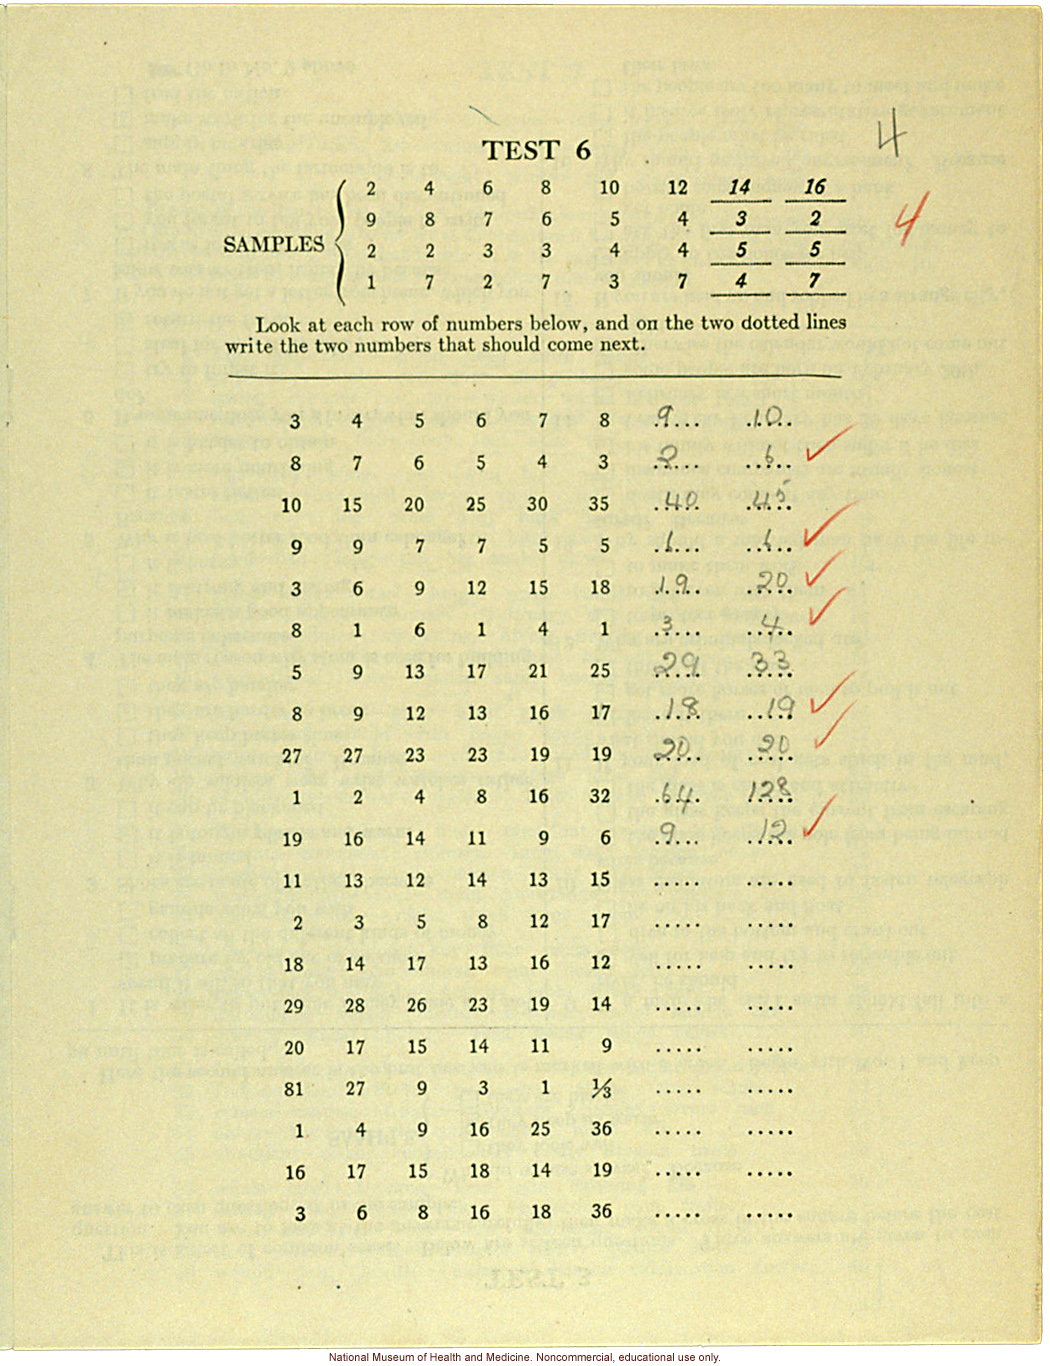 Seaford Town female anthropometric case: &quote;Army Group Examination Alpha,&quote; by Morris Steggerda for <i>Race Crossing in Jamaica</i>